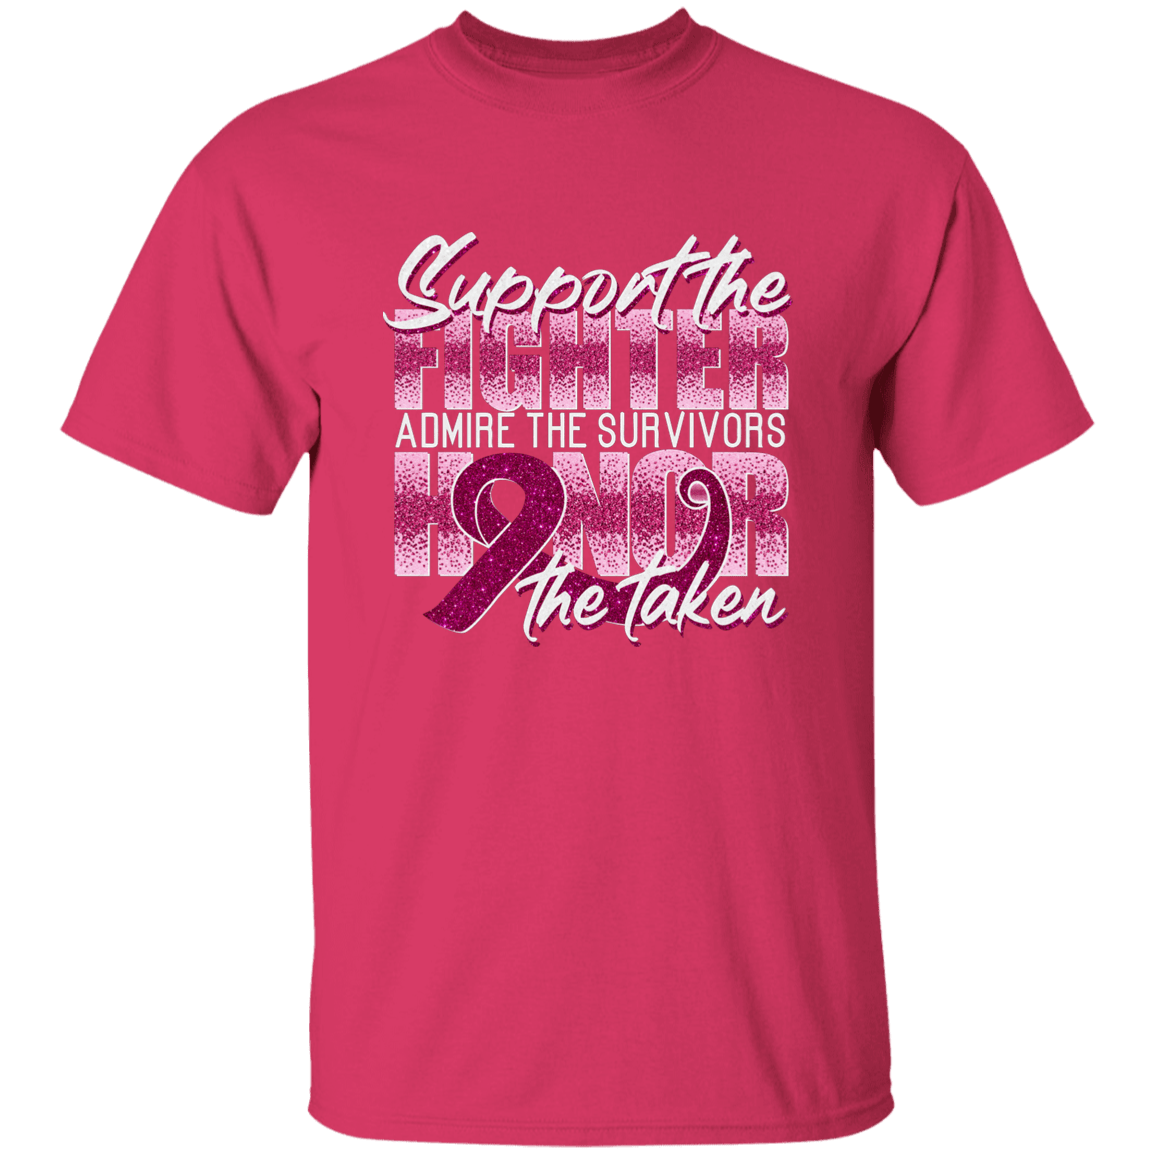 Support Admire Honor Breast Cancer T Shirt